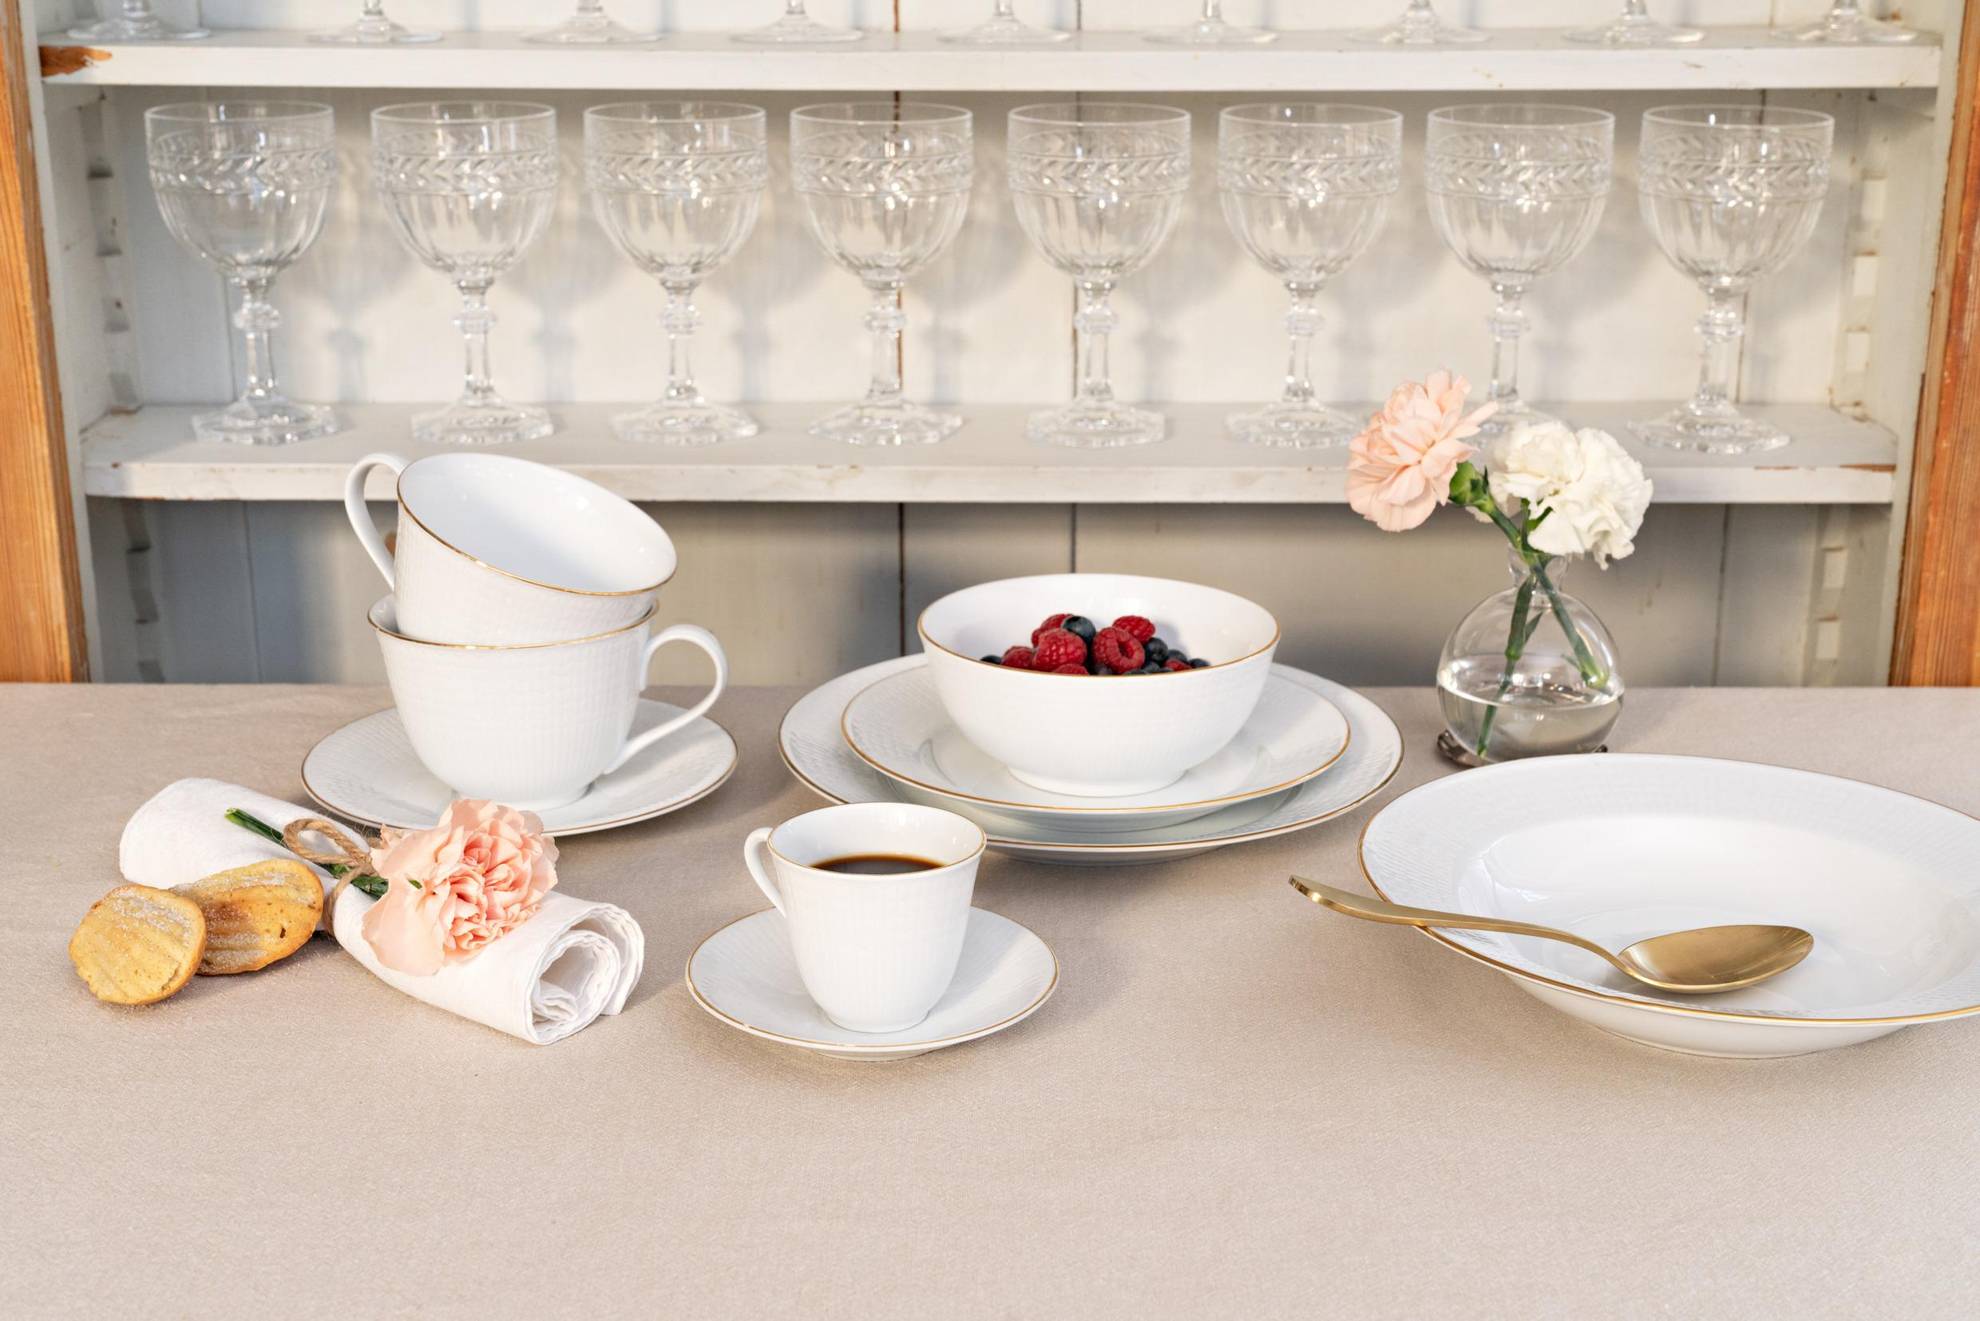 A tableware service called “Swedish Grace” on a table. Plates in different sizes a bowl with berries, two tea cups and a cup of coffee. Behind there are a shelf with several wine glasses.